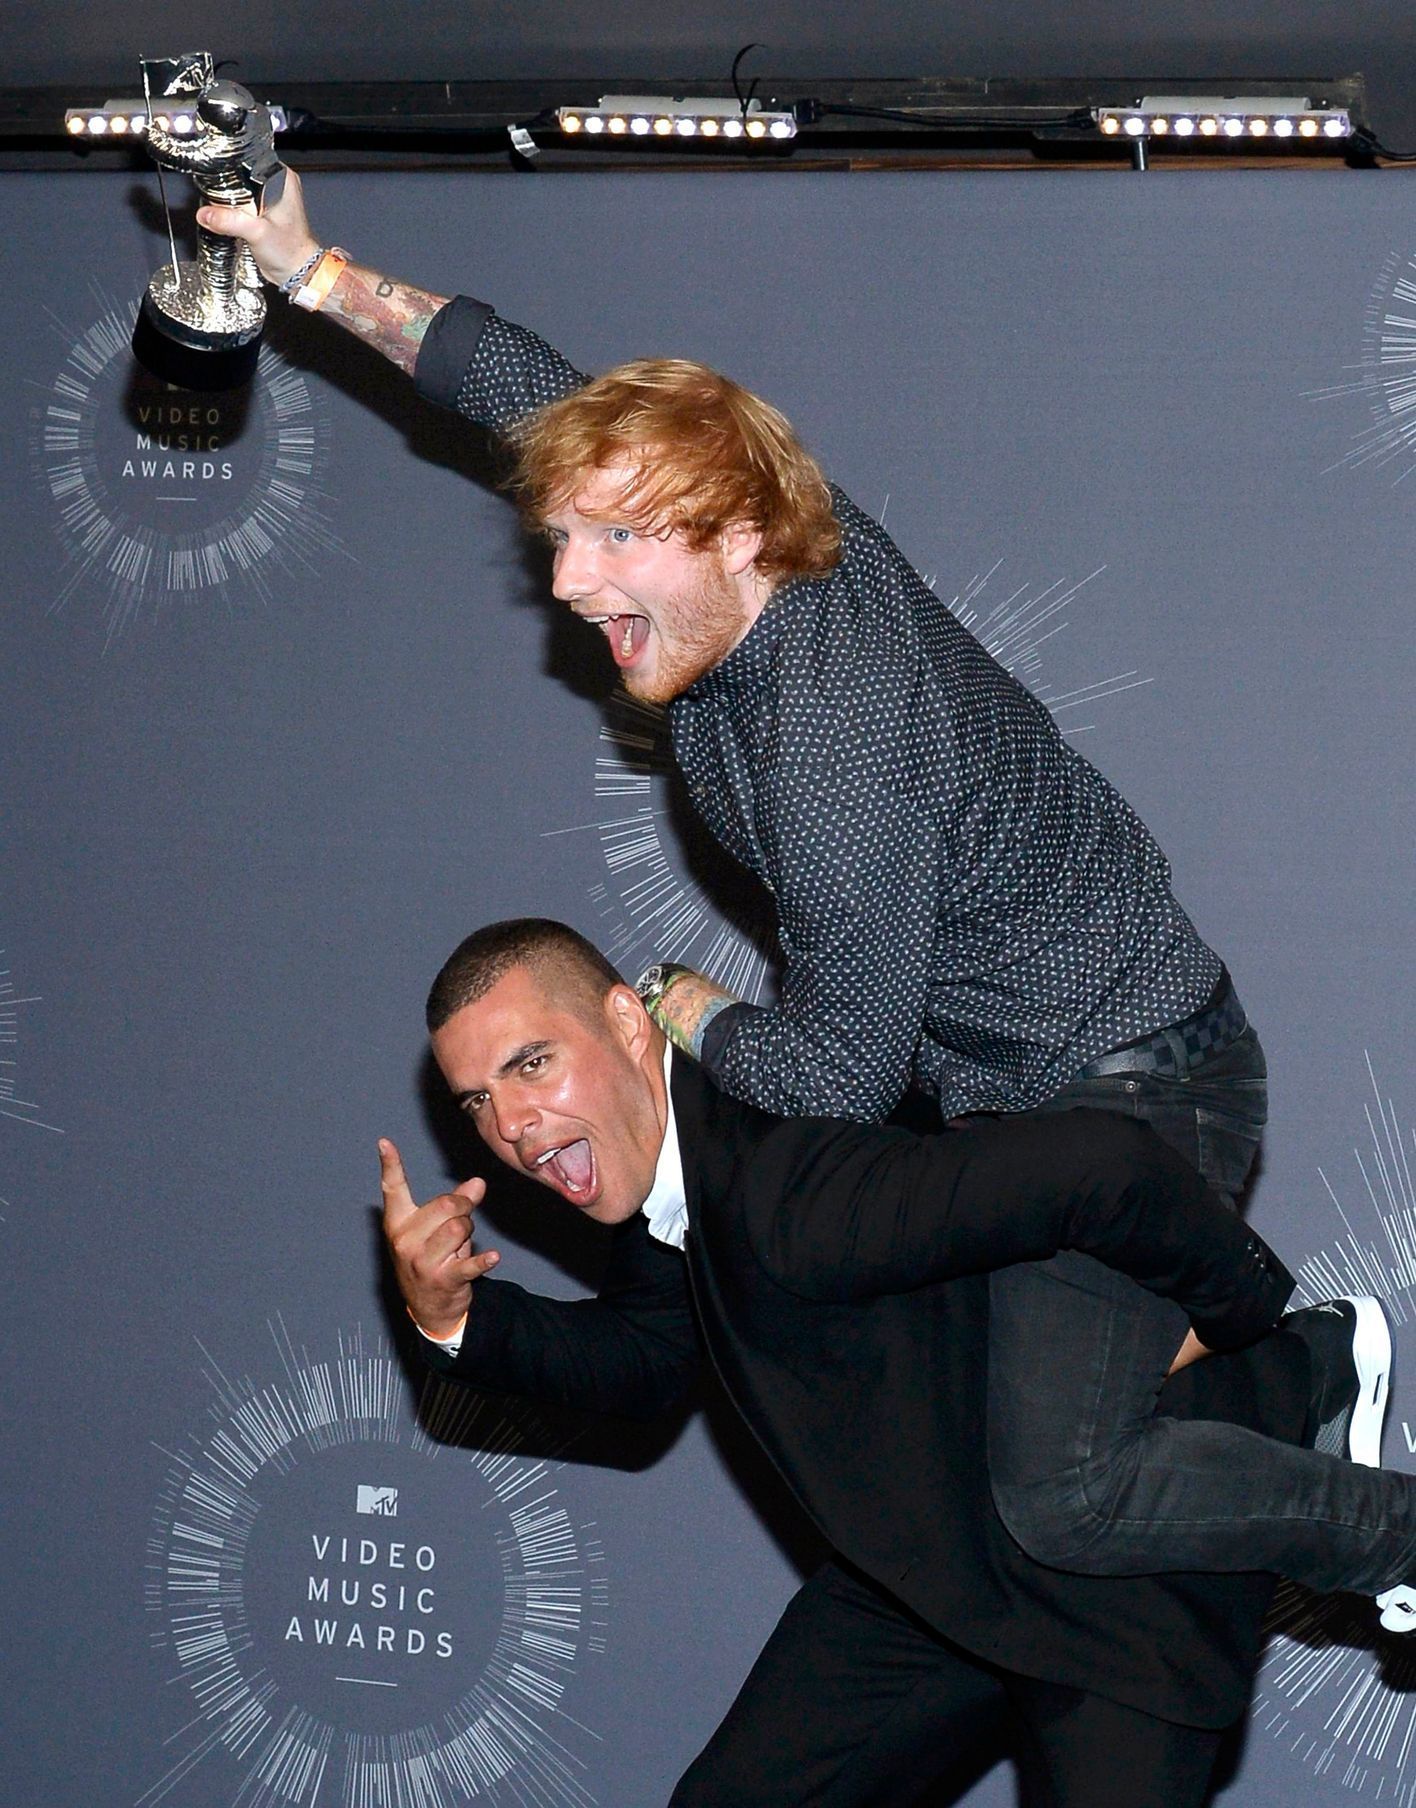 Singer Ed Sheeran jumps onto the back of director Emil Nava backstage after winning the award for best male video for &quot;Sing&quot; backstage during the 2014 MTV Video Music Awards in Inglewood